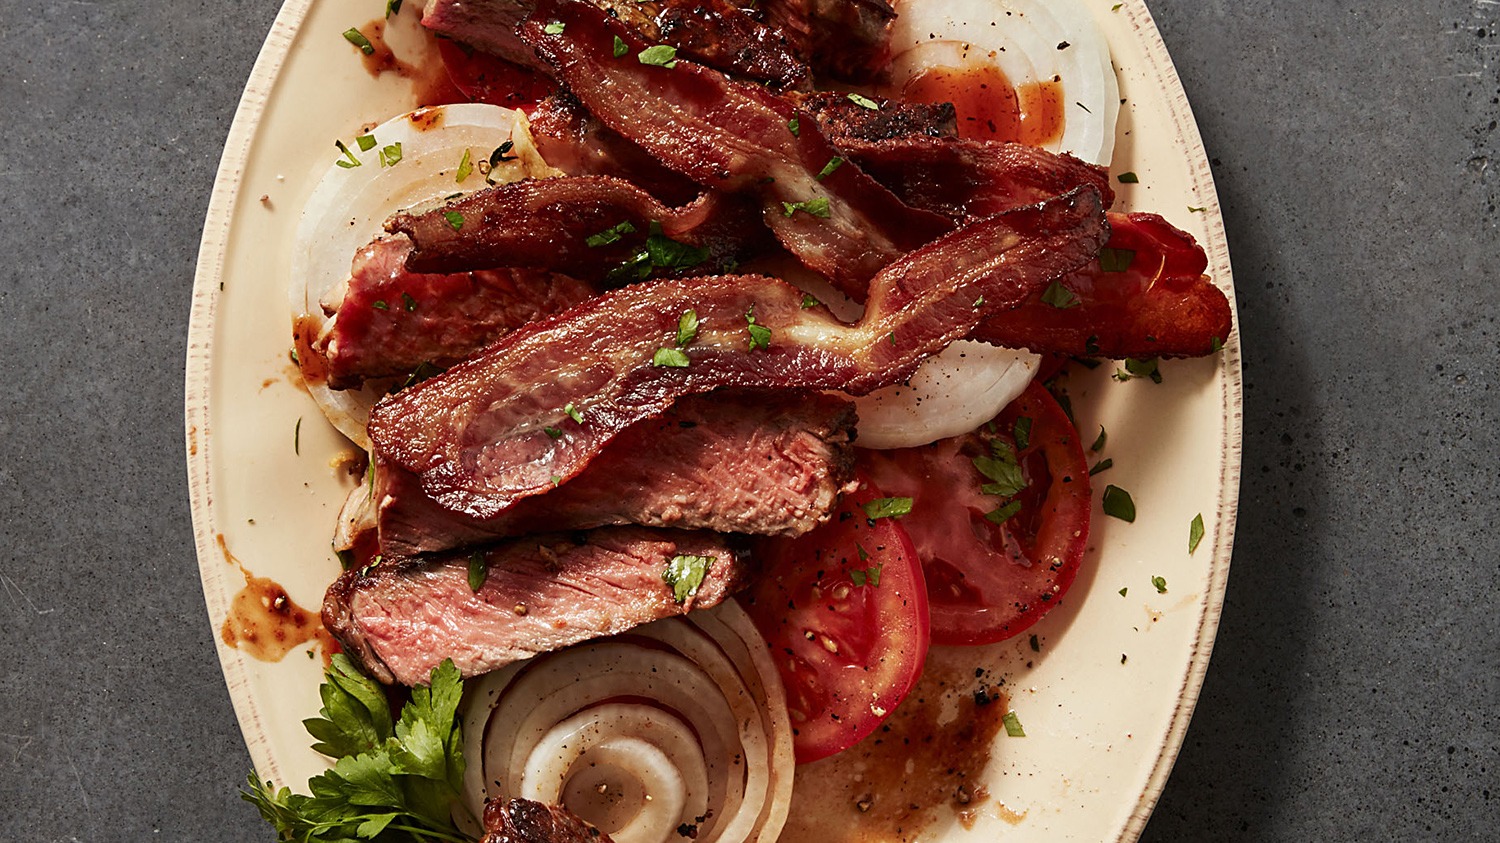 Bacon, Onion & Tomatoes with Sliced Steak